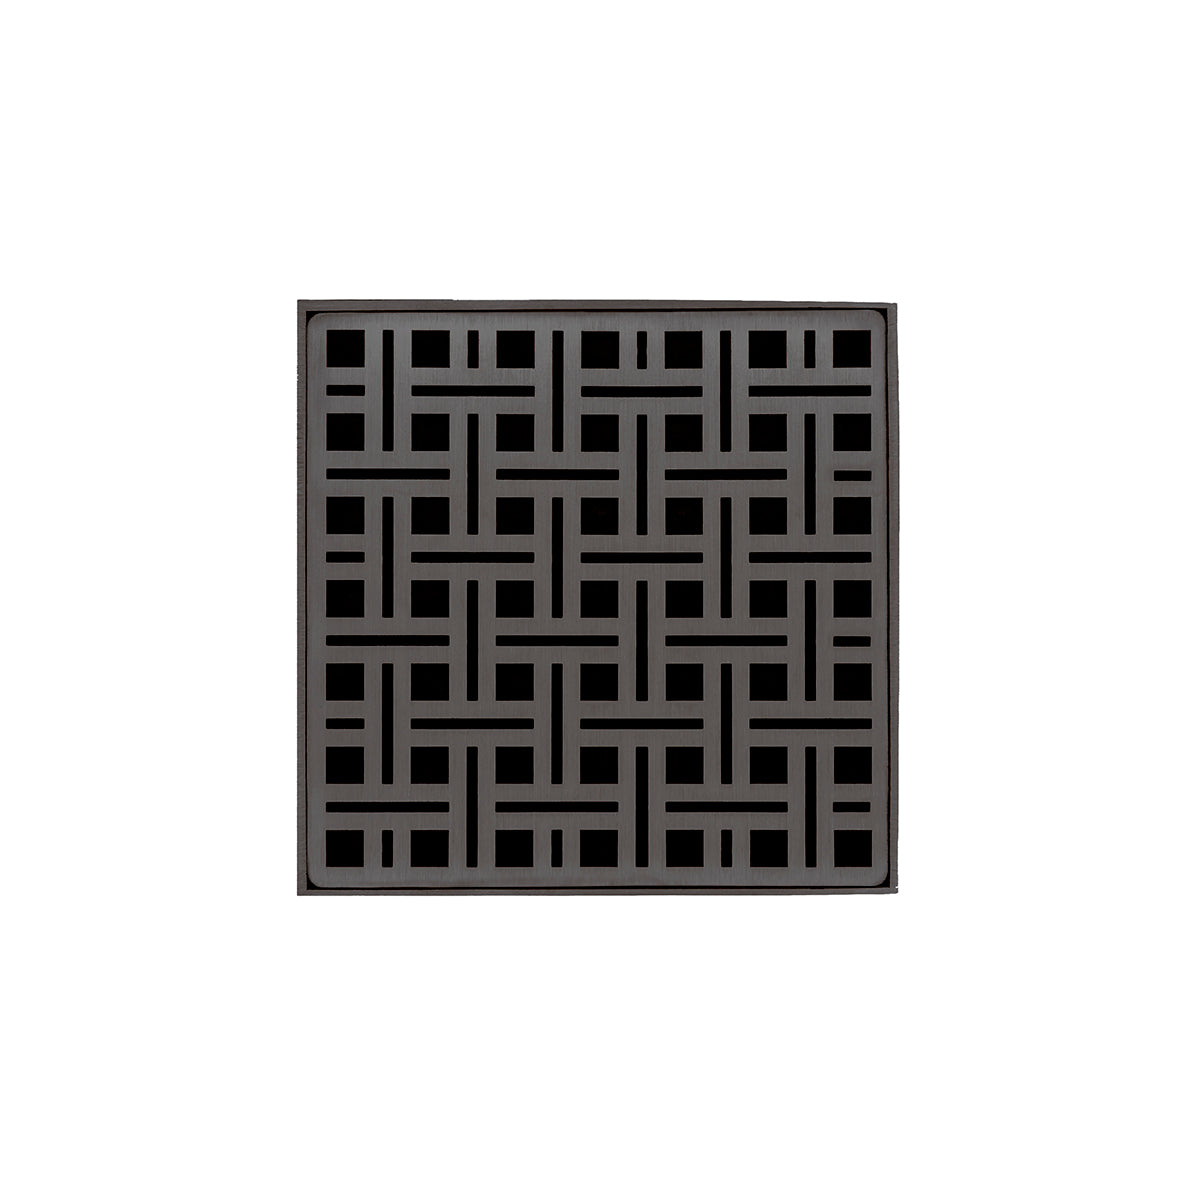 Infinity Drain 5" x 5" VD 5 High Flow Premium Center Drain Kit with Weave Pattern Decorative Plate with ABS Drain Body, 3" Outlet